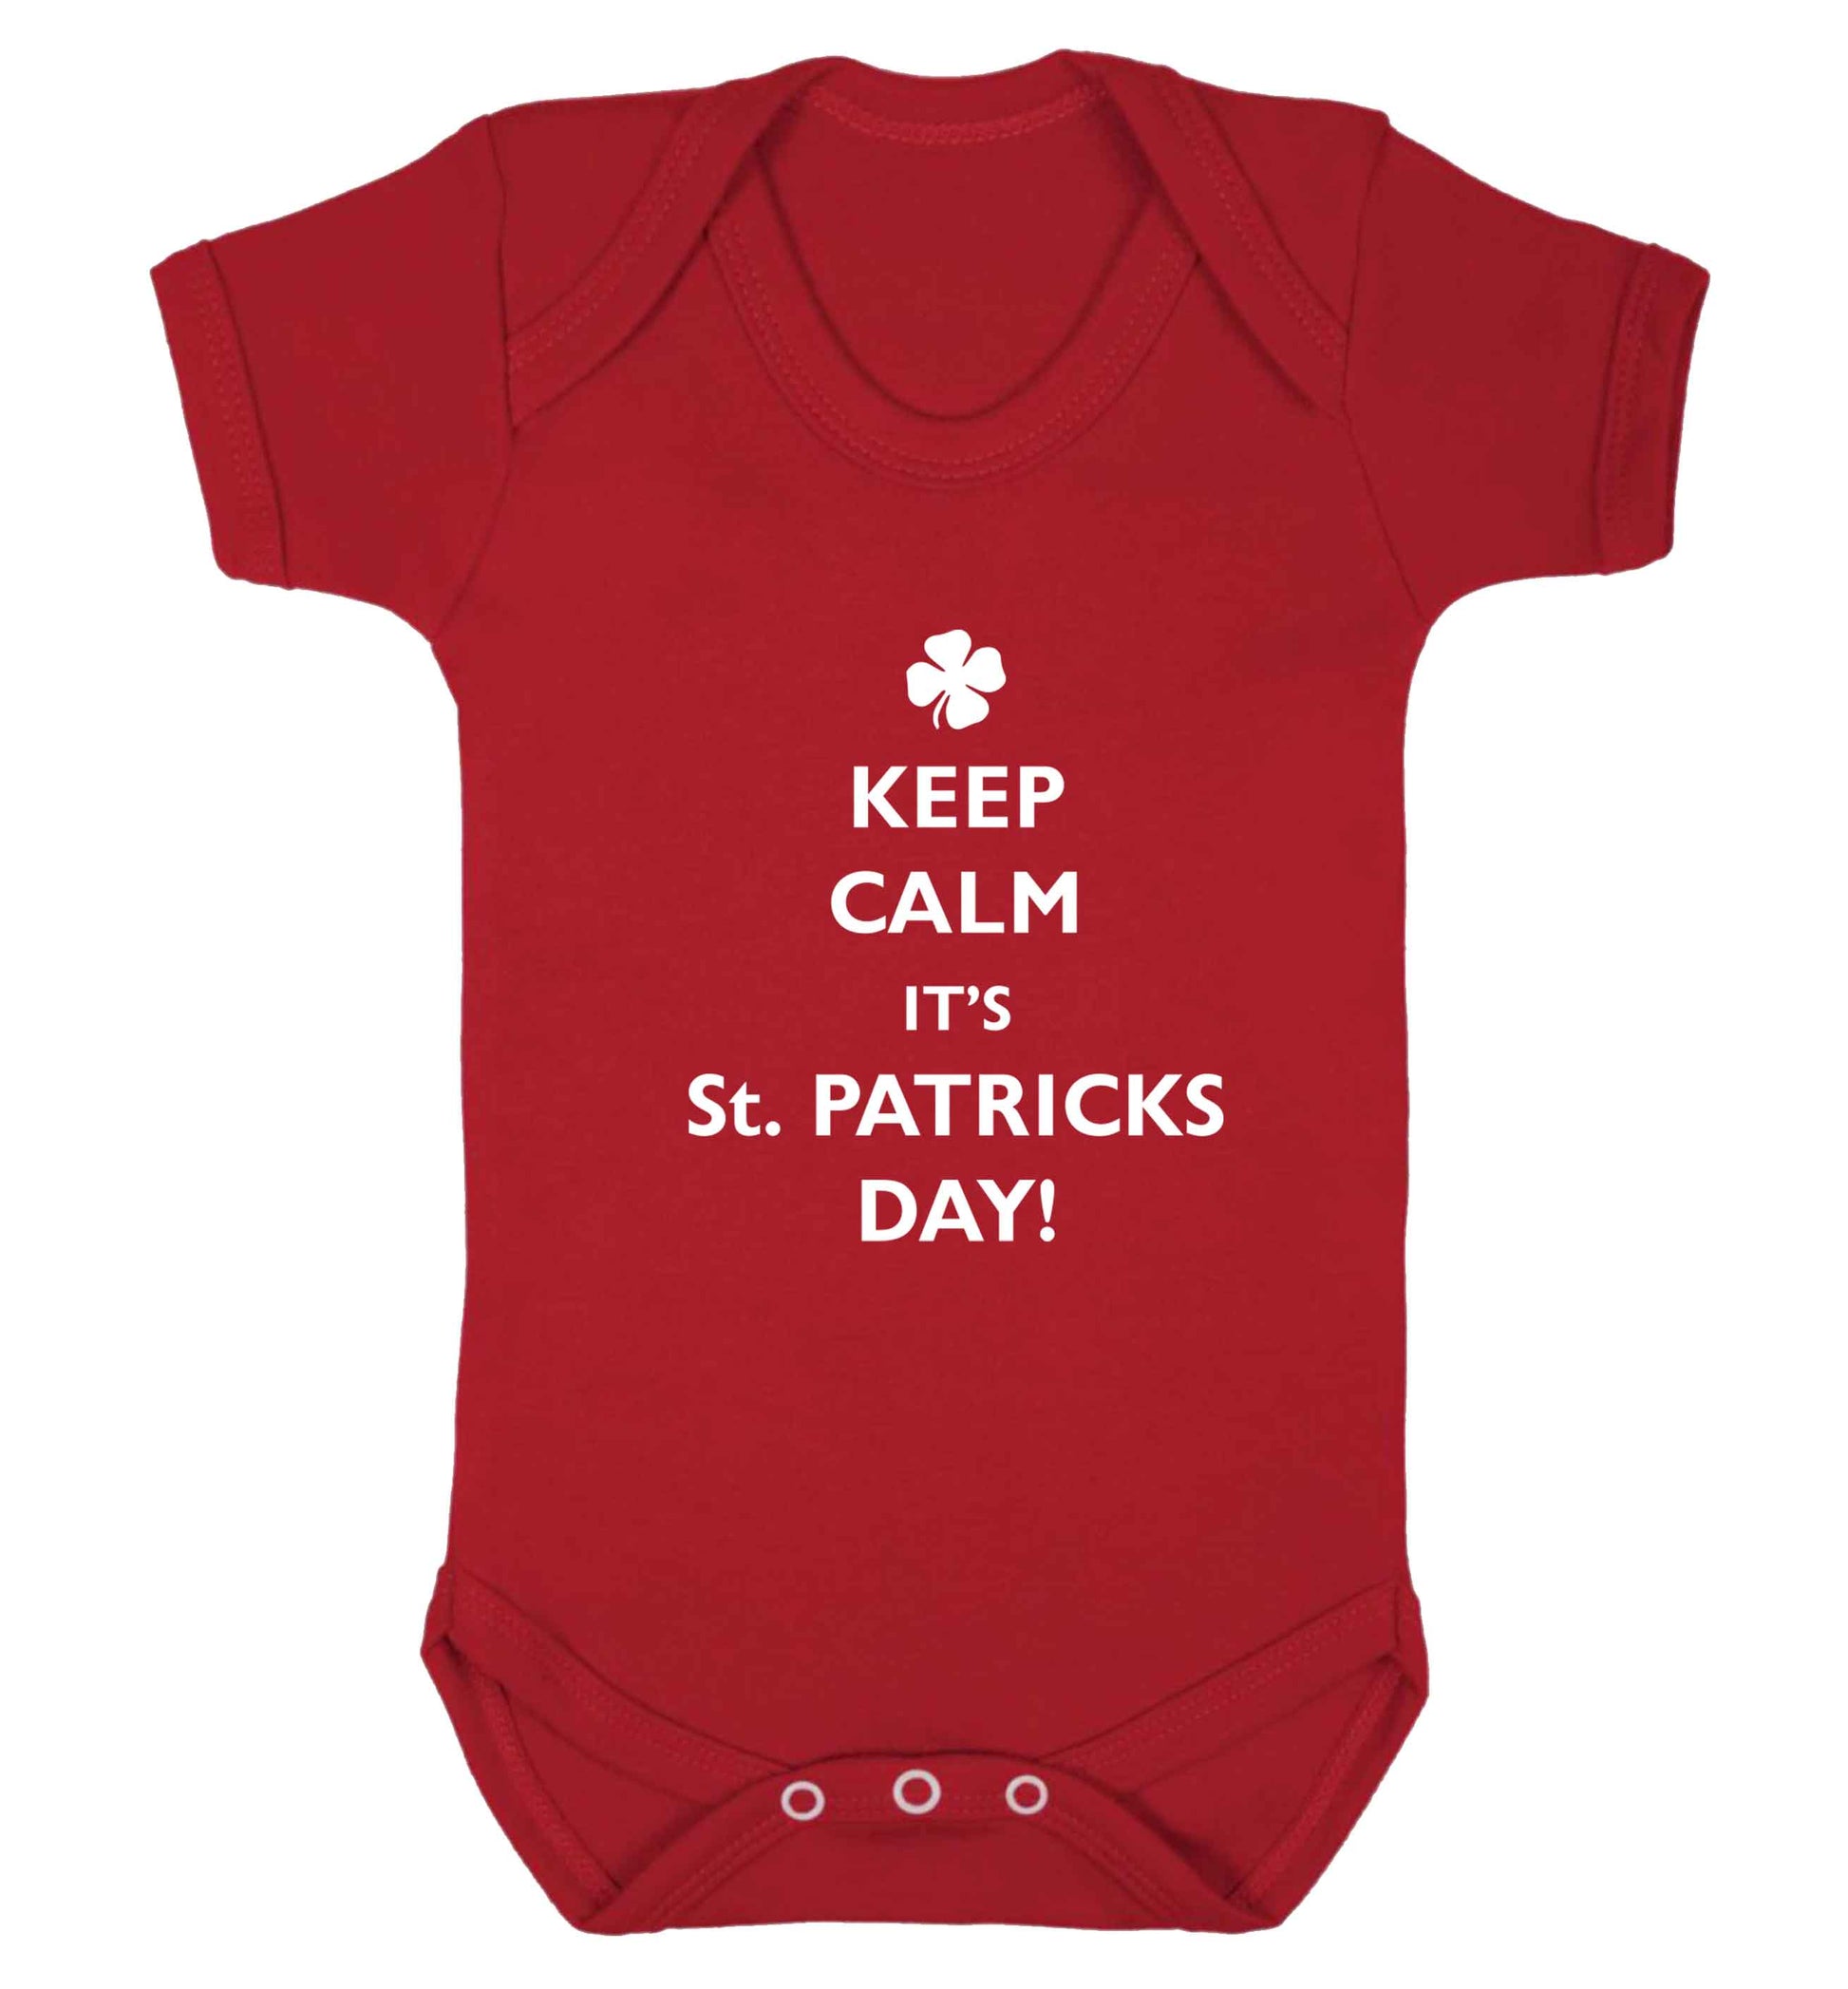 Keep calm it's St.Patricks day baby vest red 18-24 months